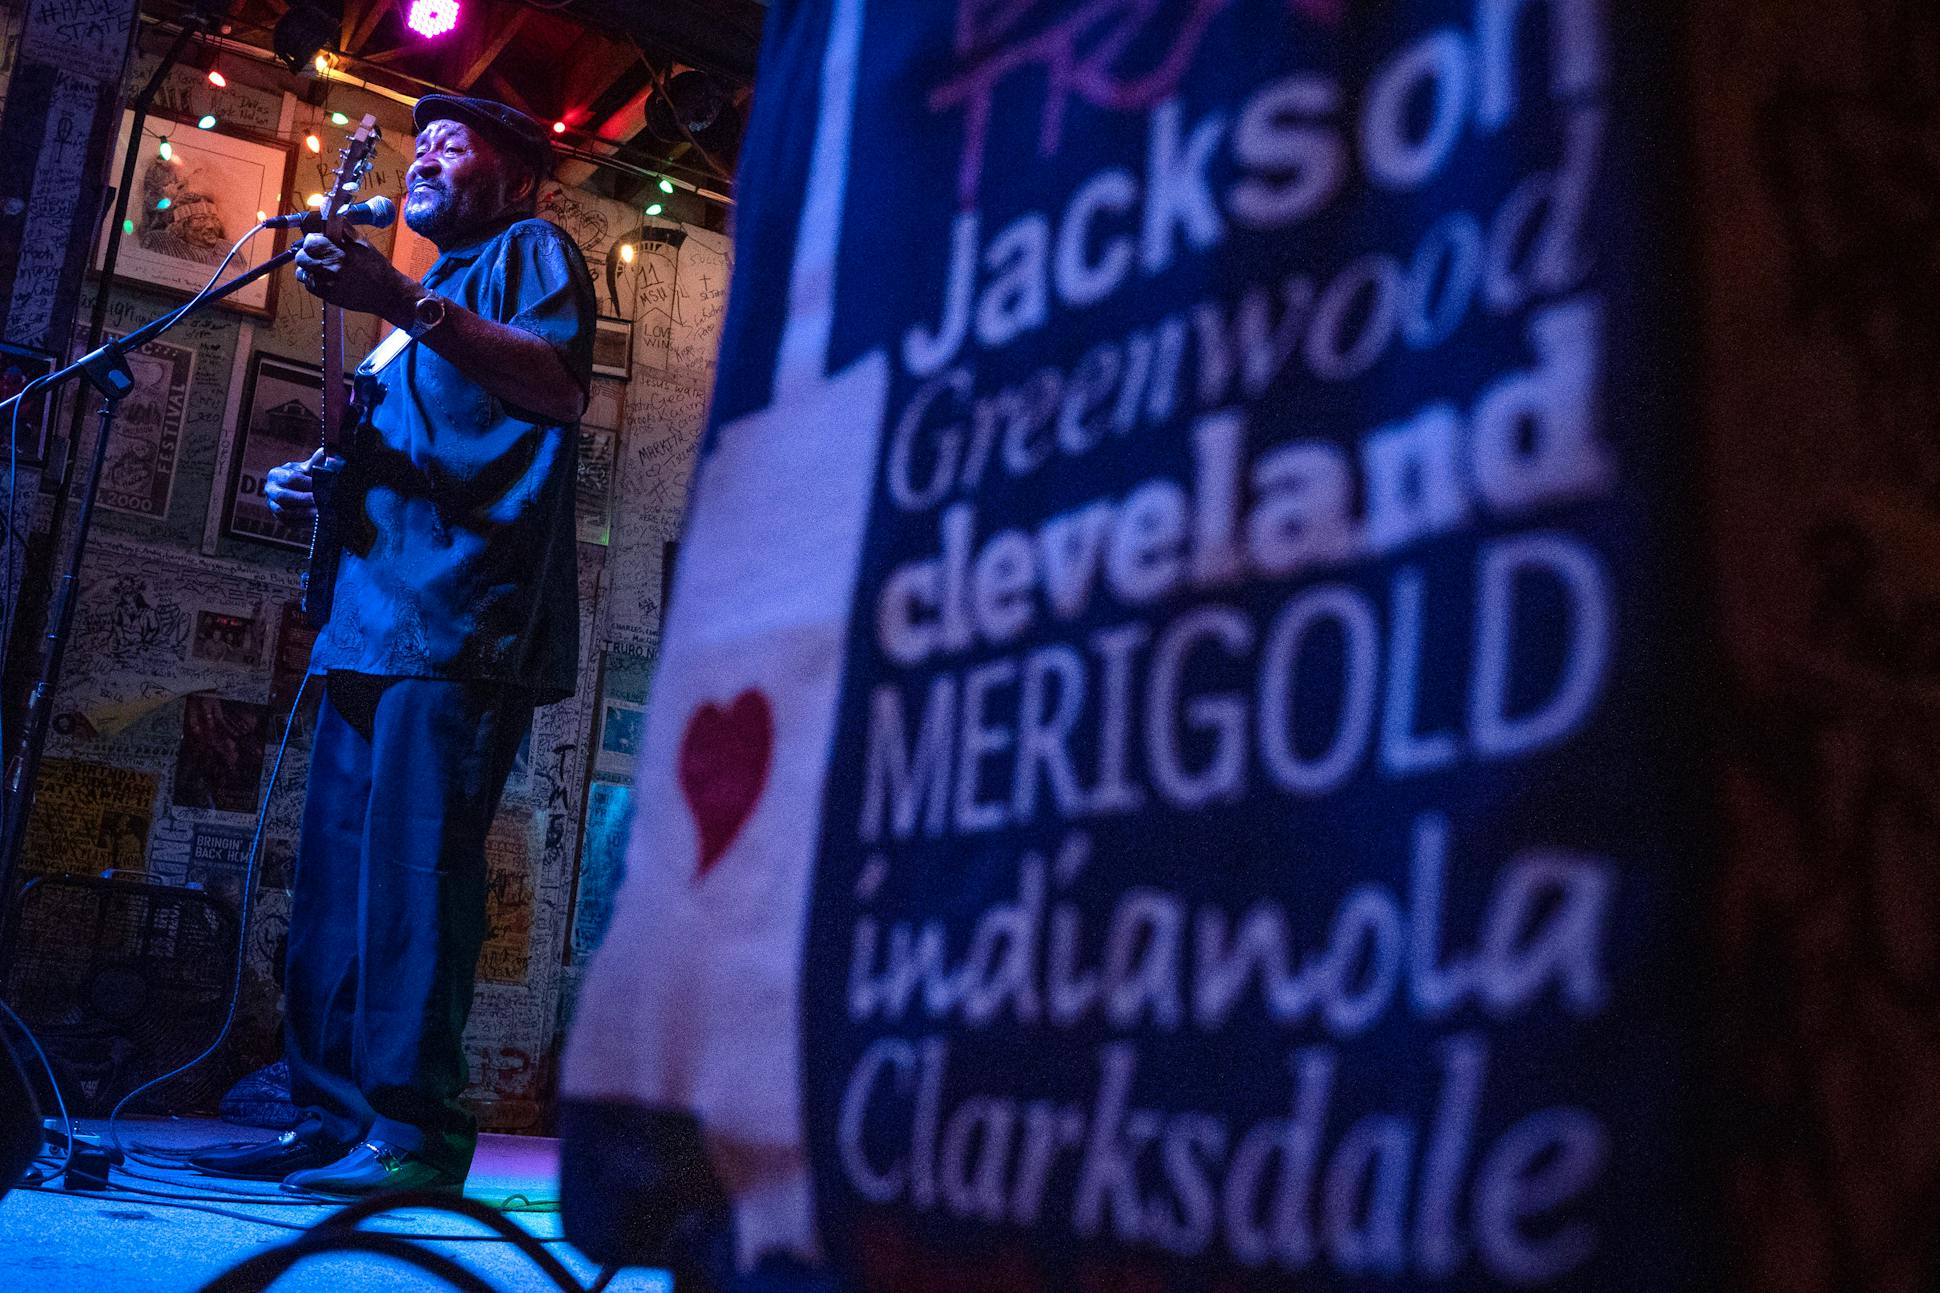 James “Super Chikan” Johnson played the blues at Clarksdale's touristy graffiti-inscribed Ground Zero. One of the club's owners is actor Morgan Freeman.